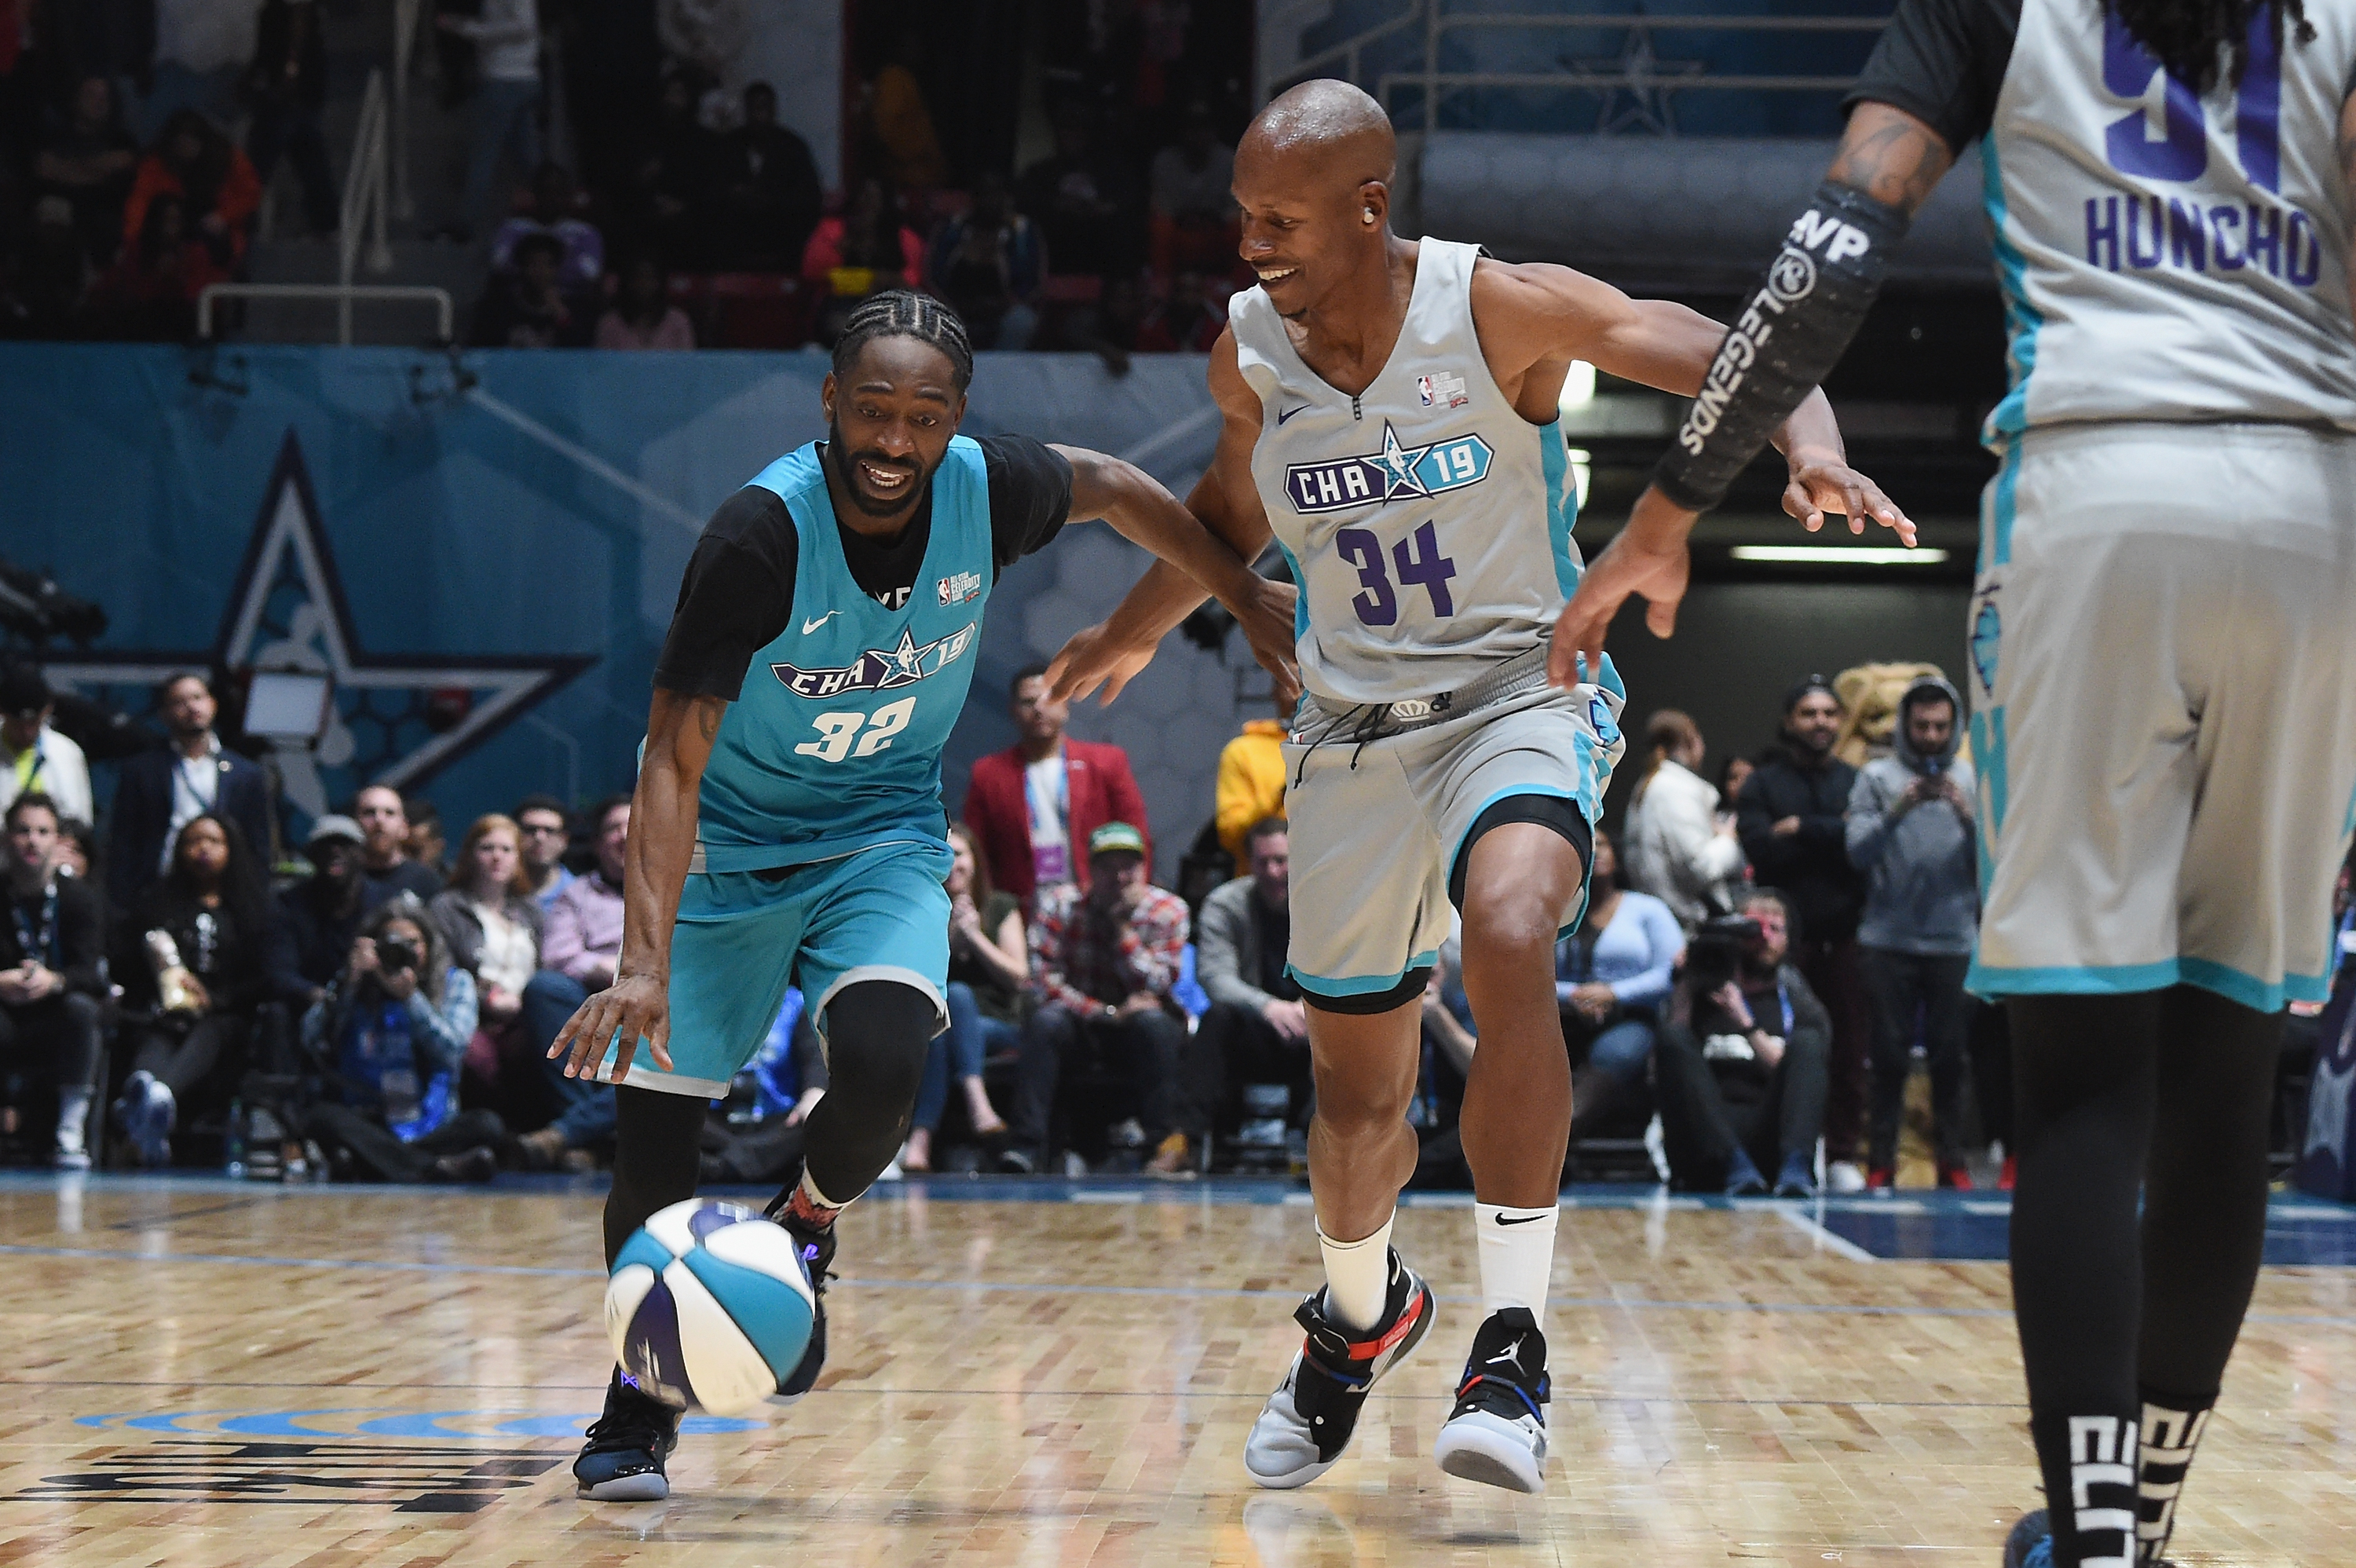 Famous Los Put On A Show At The 2019 NBA AllStar Celebrity Game